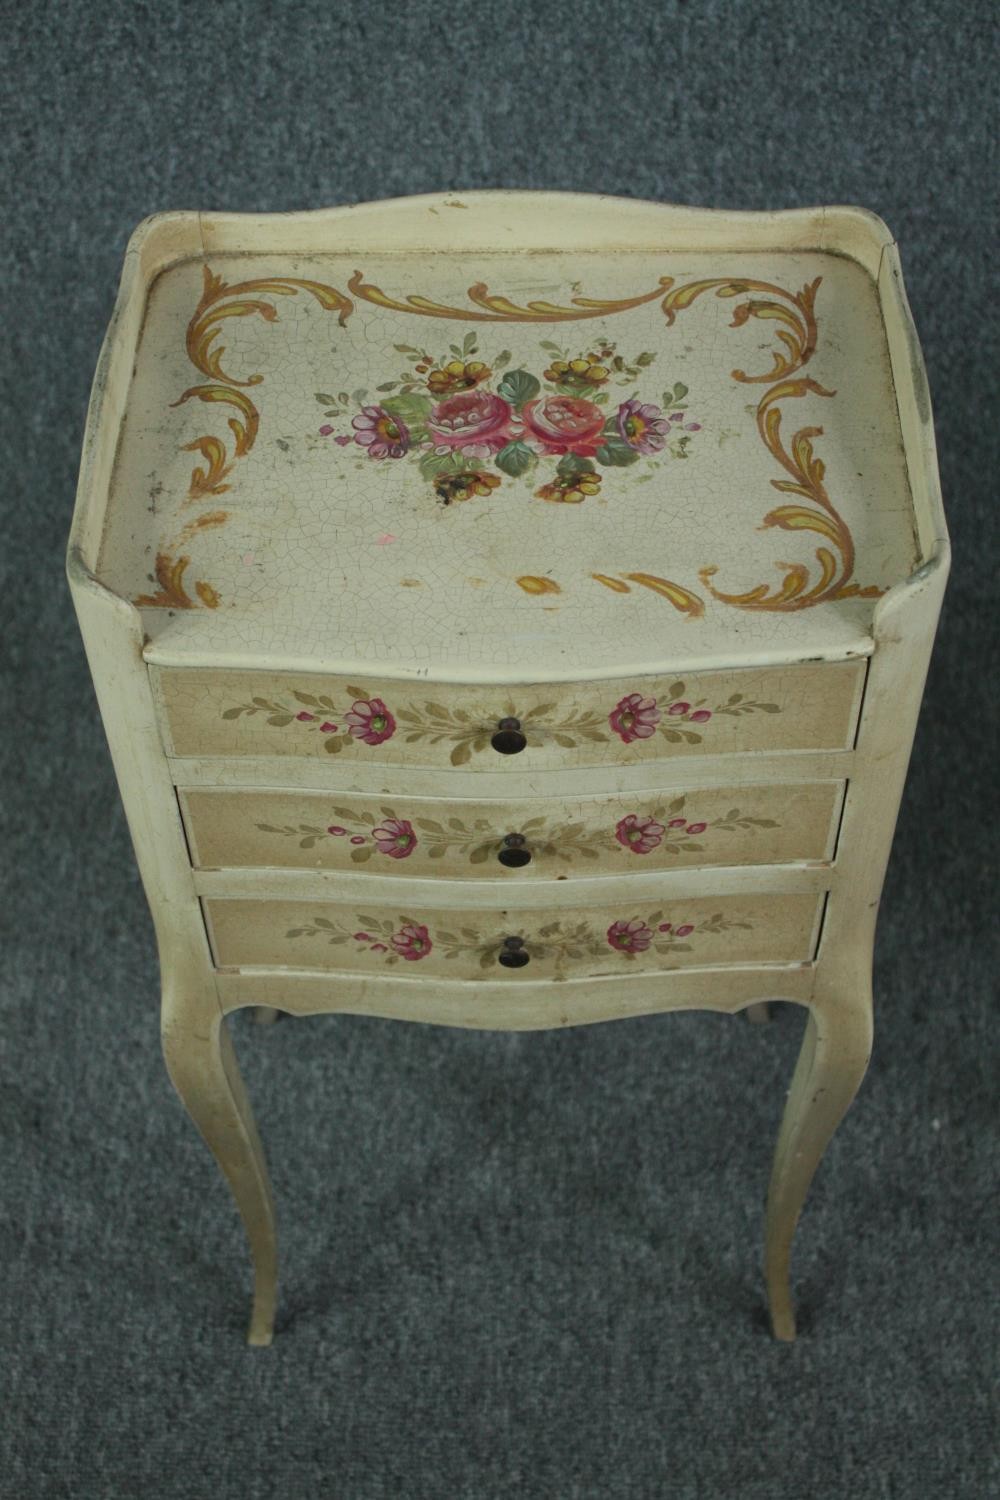 Bedside chests, a pair, Louis XV style painted and hand decorated. H.65 W.34 D.25cm. (each) - Image 4 of 6